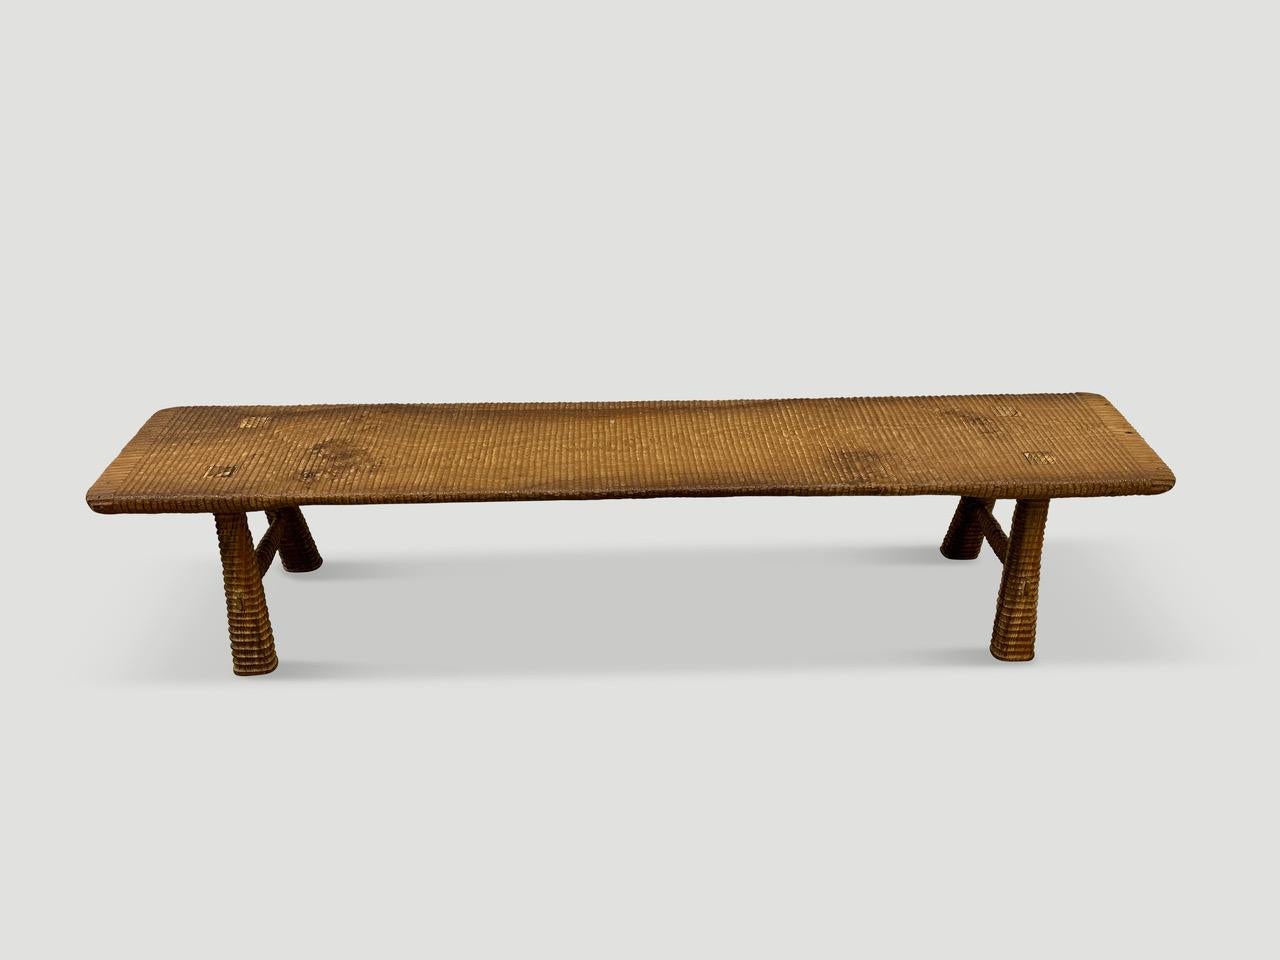 Andrianna Shamaris Impressive Minimalist Carved Teak Wood Bench In Excellent Condition For Sale In New York, NY